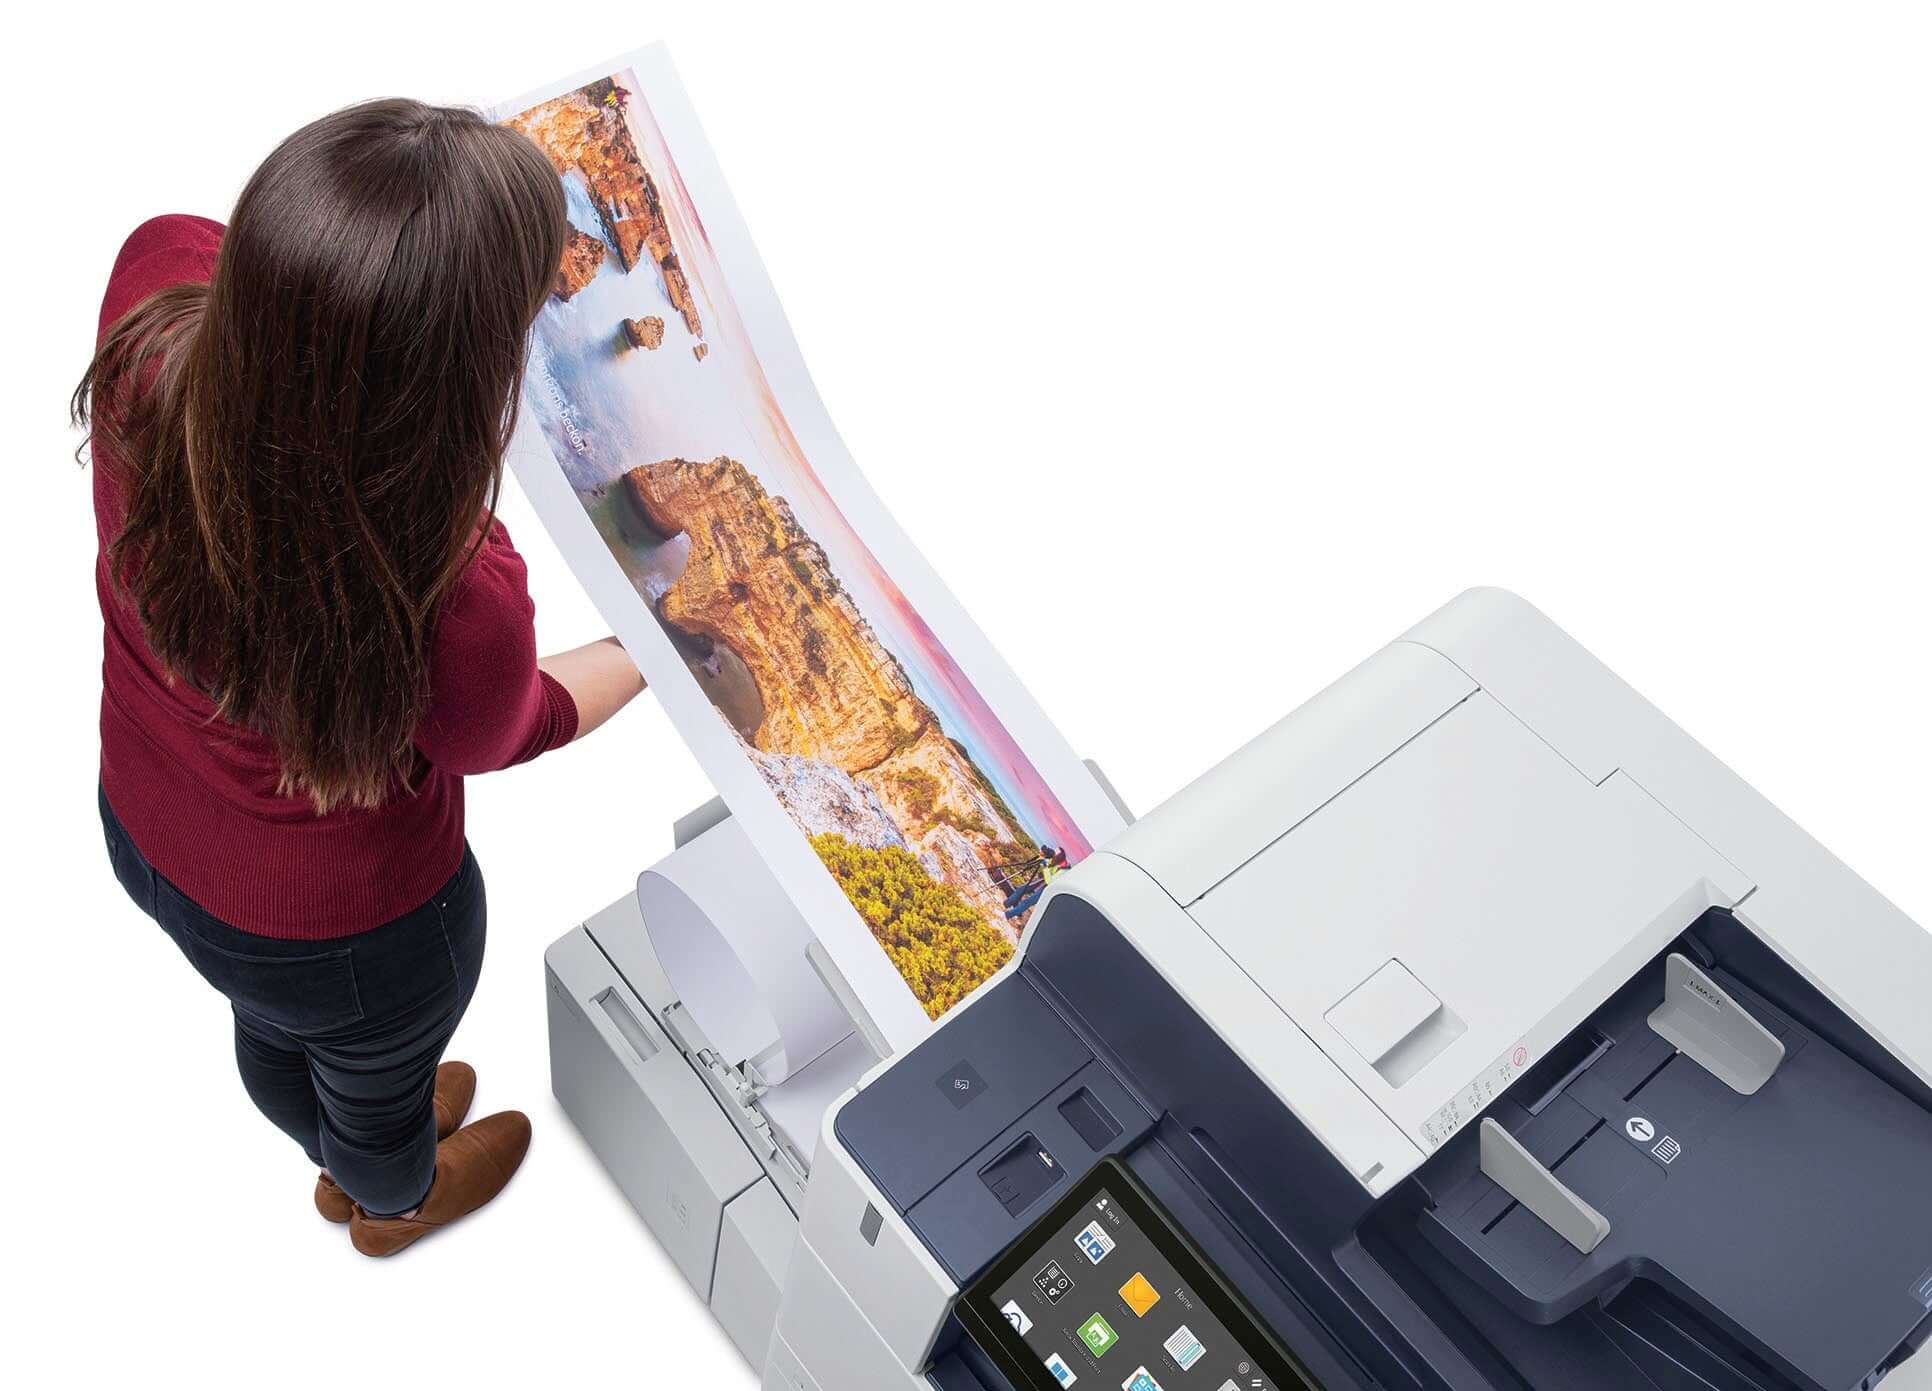 Xerox AltaLink C8135 A3 Colour Multi-Function Printer - 2,180 paper Supply